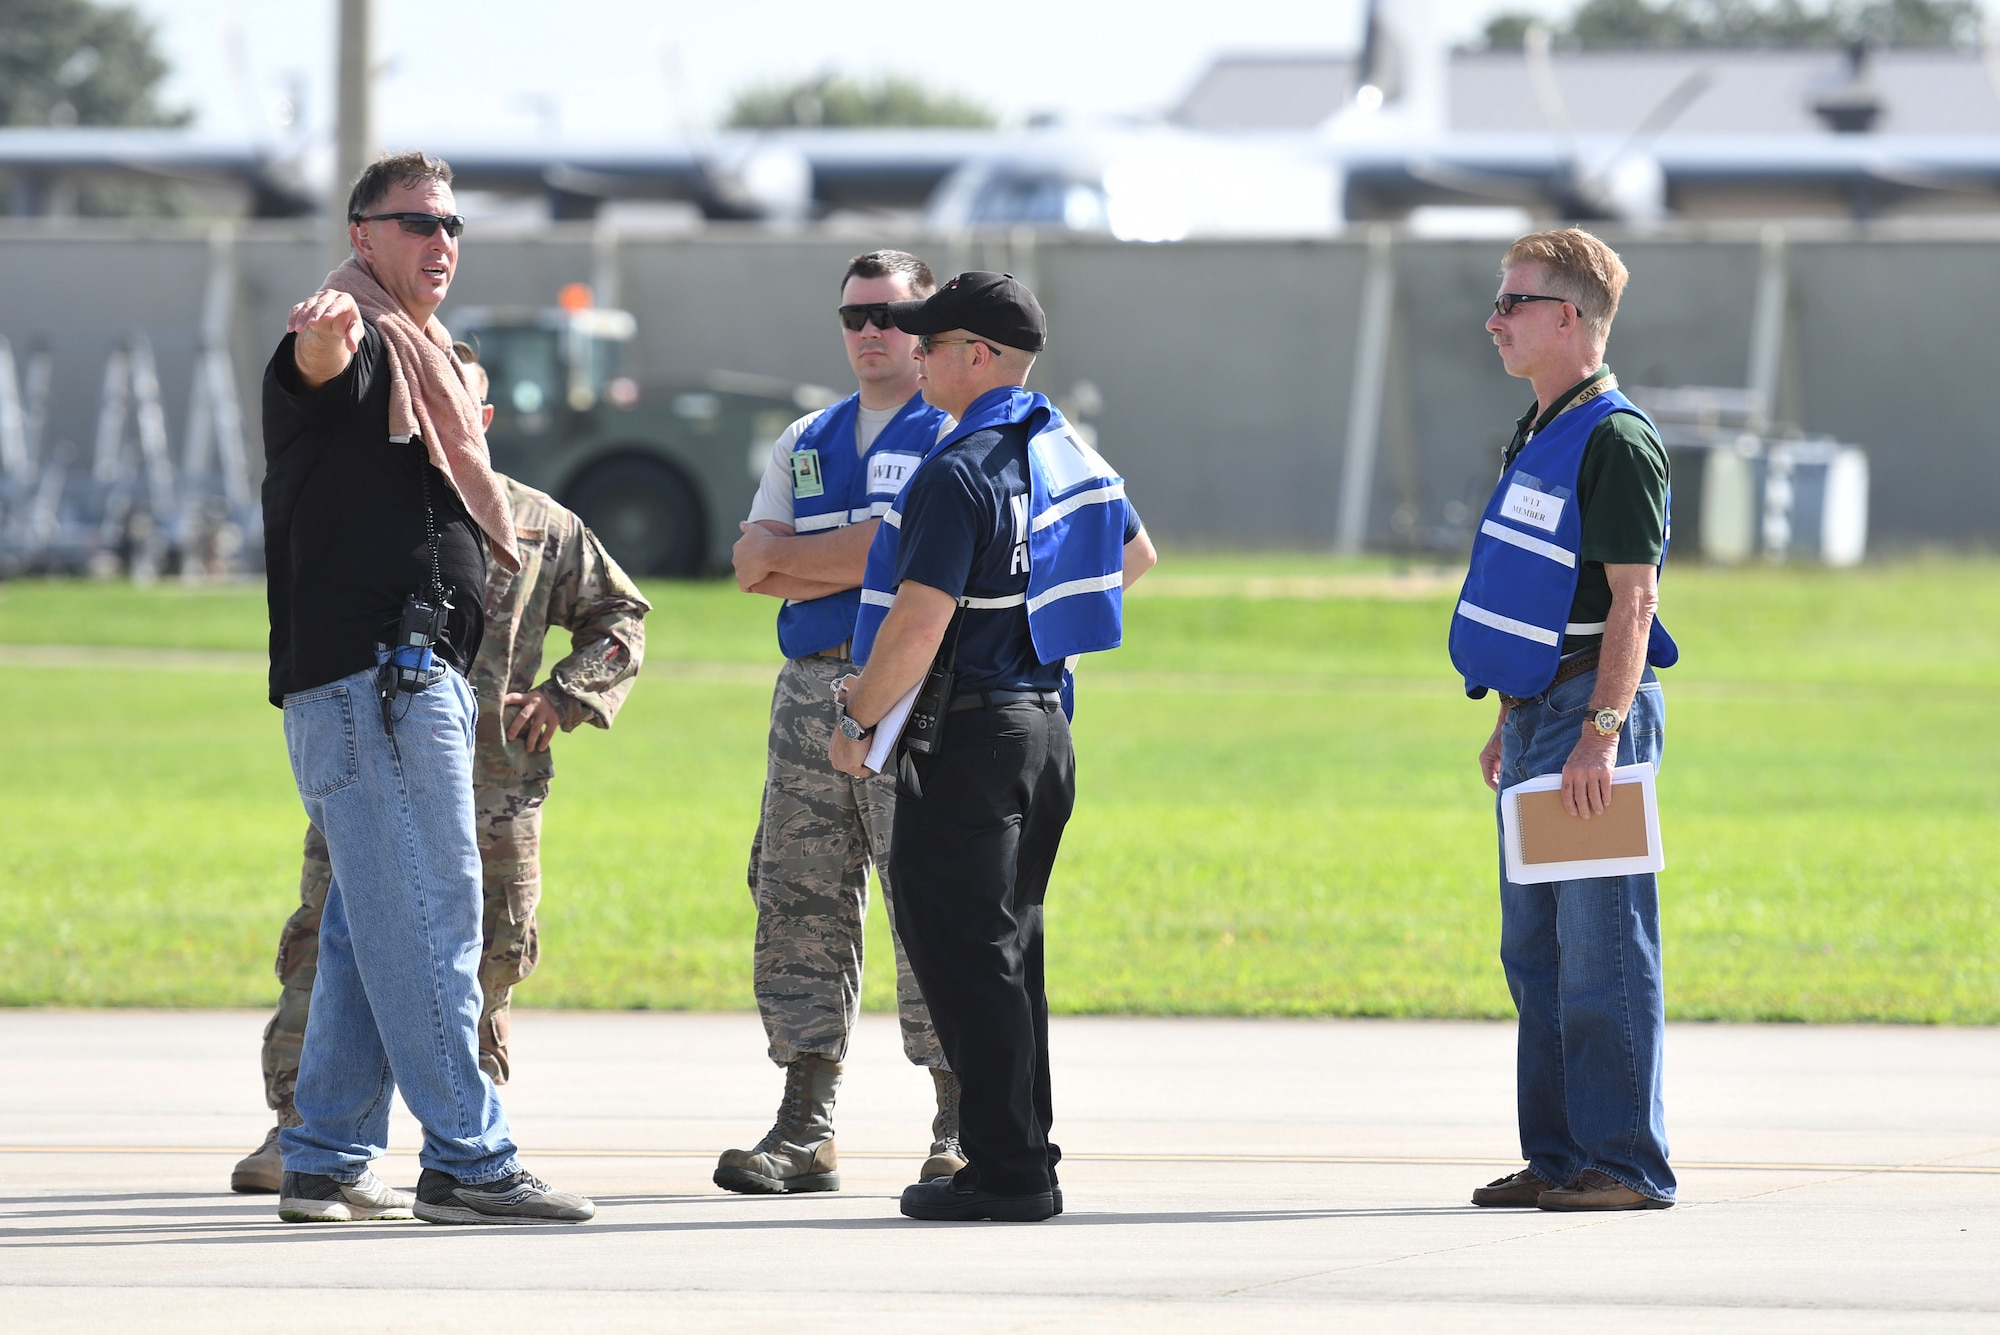 Members of the 81st Training Wing wing inspection team discuss the scenario during a major accident response exercise on the flight line at Keesler Air Force Base, Mississippi, June 21, 2018. The exercise scenario simulated a C-130J Super Hercules in-flight emergency causing a plane crash, which resulted in a mass casualty response event. This exercise tested the base’s ability to respond in a crisis situation. (U.S. Air Force photo by Kemberly Groue)